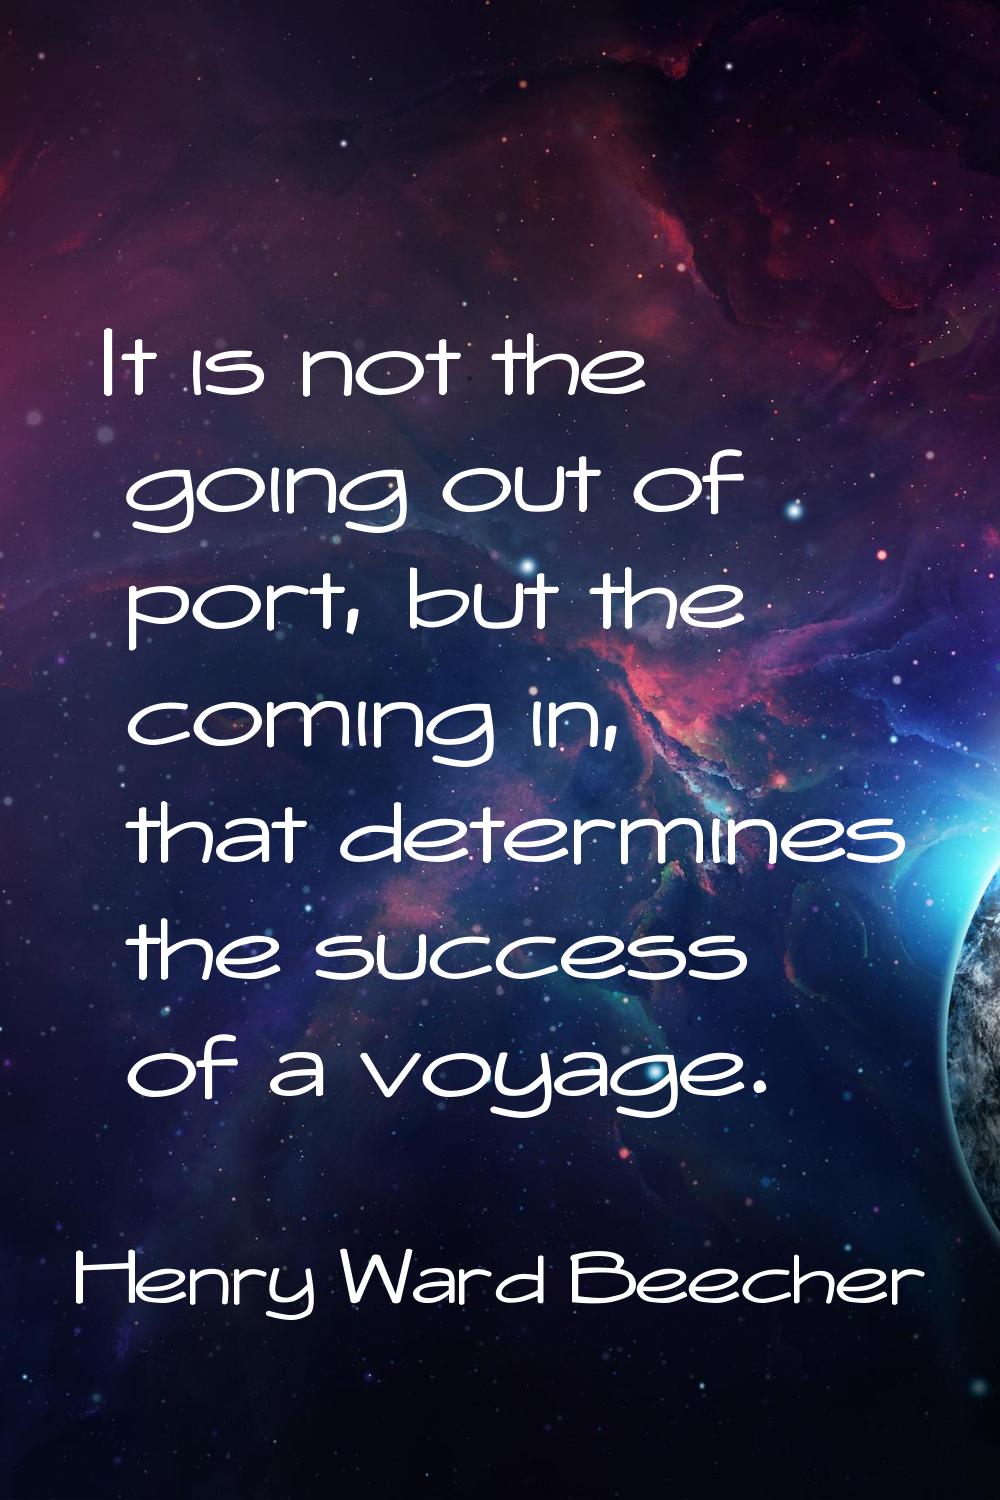 It is not the going out of port, but the coming in, that determines the success of a voyage.